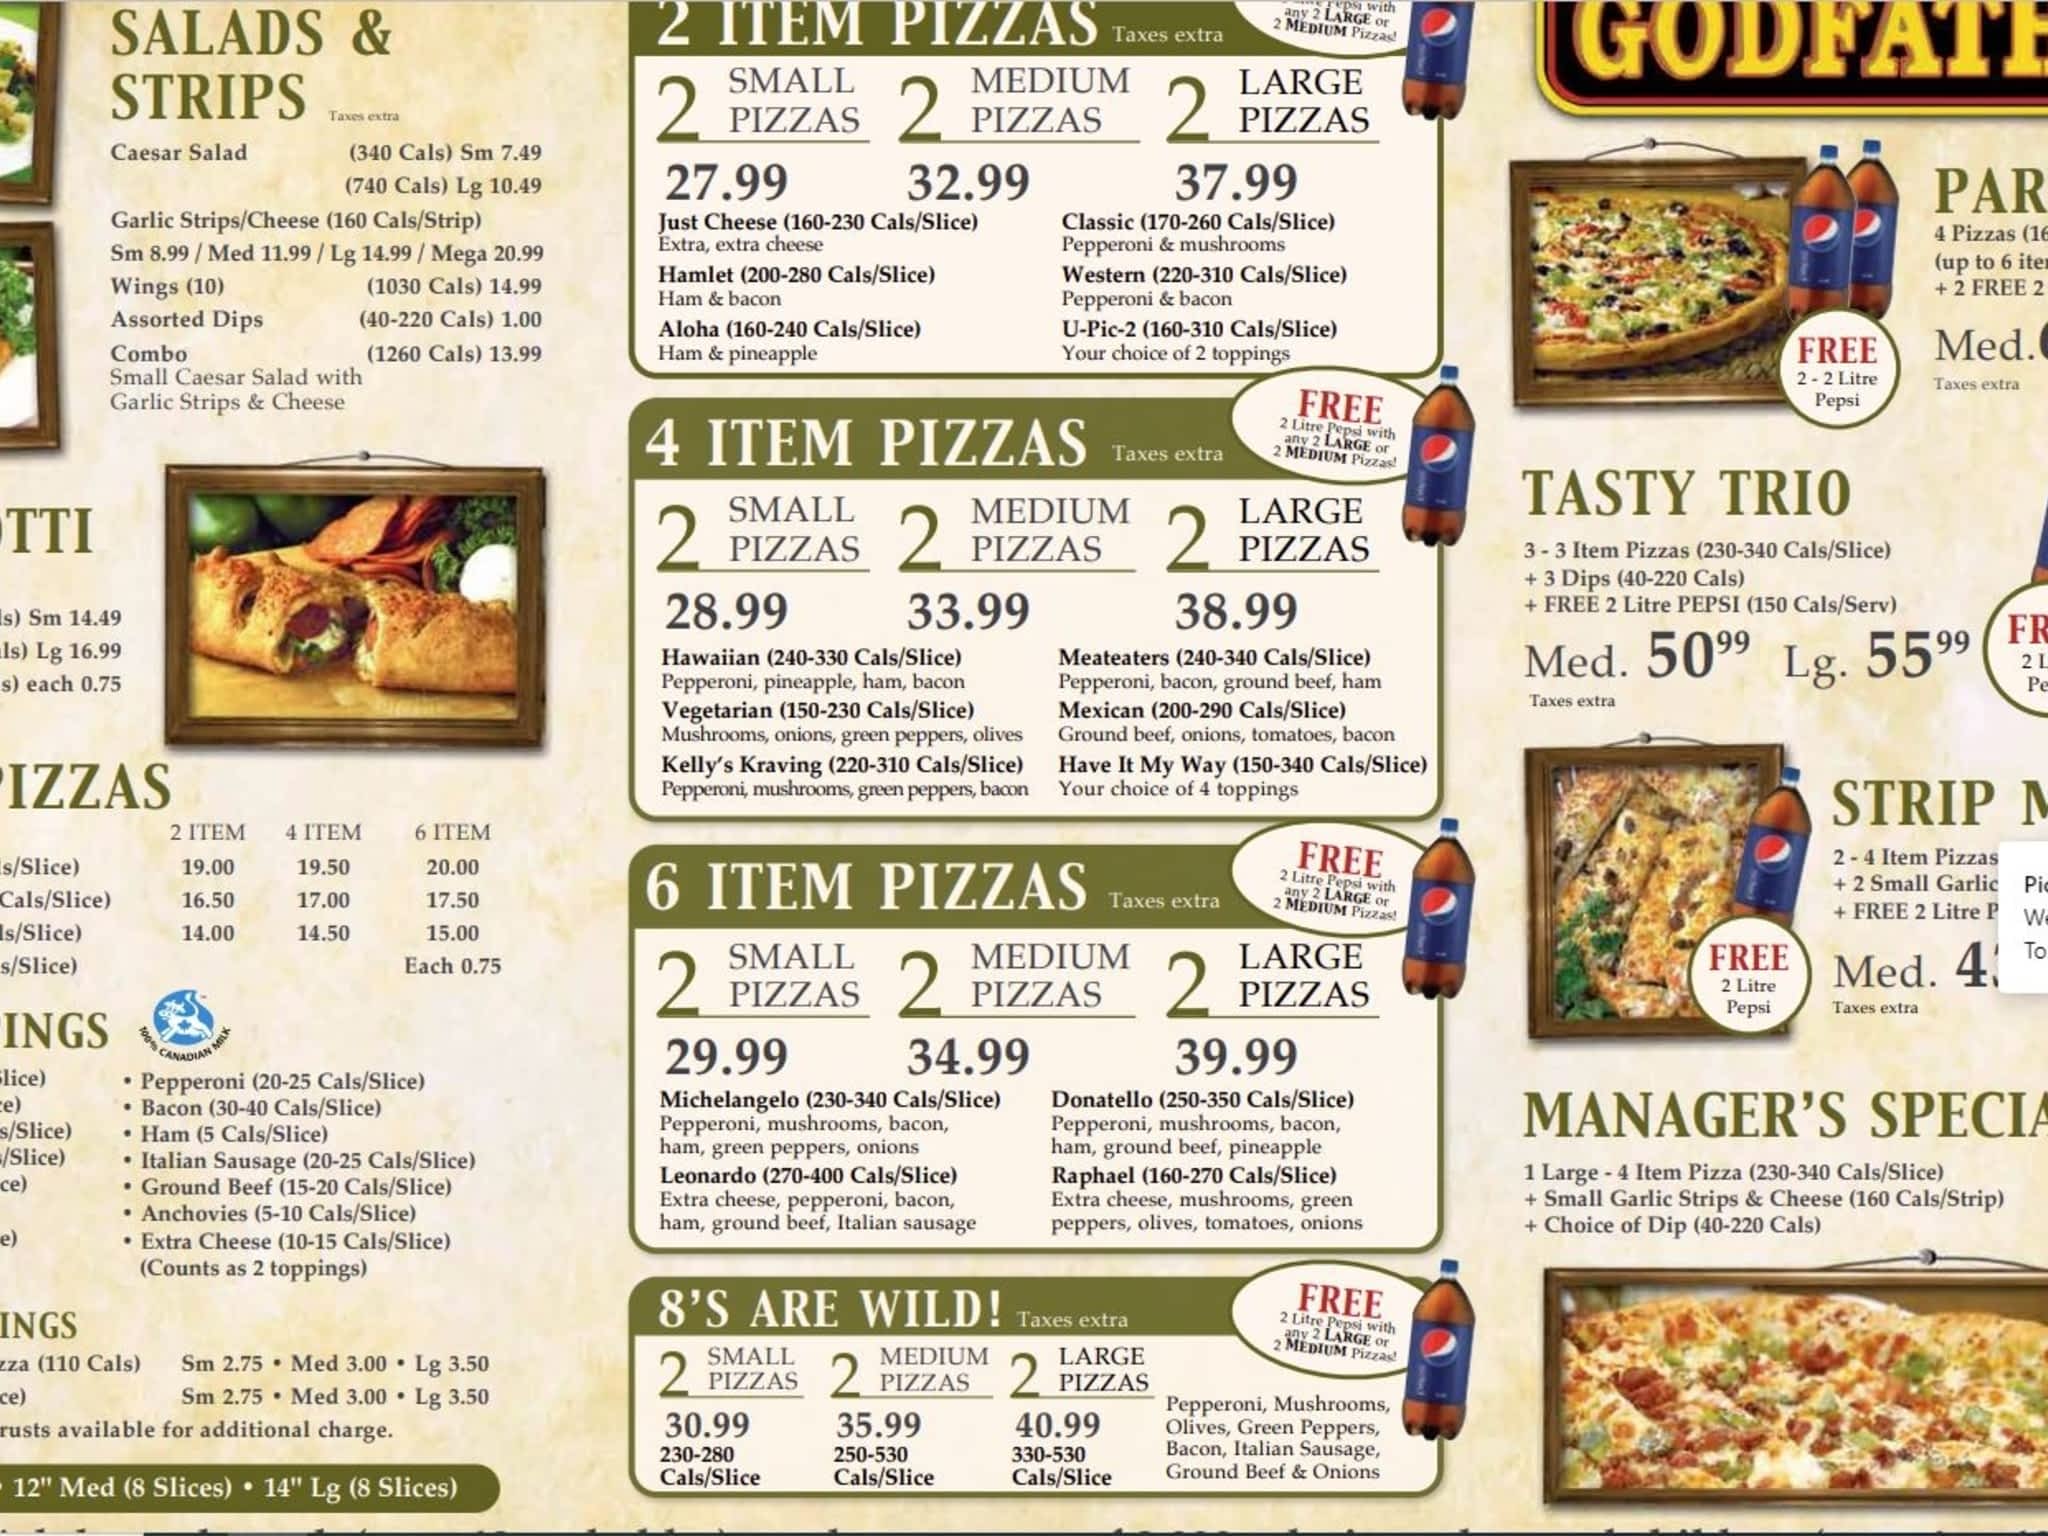 photo Godfathers Pizza - Dunnville